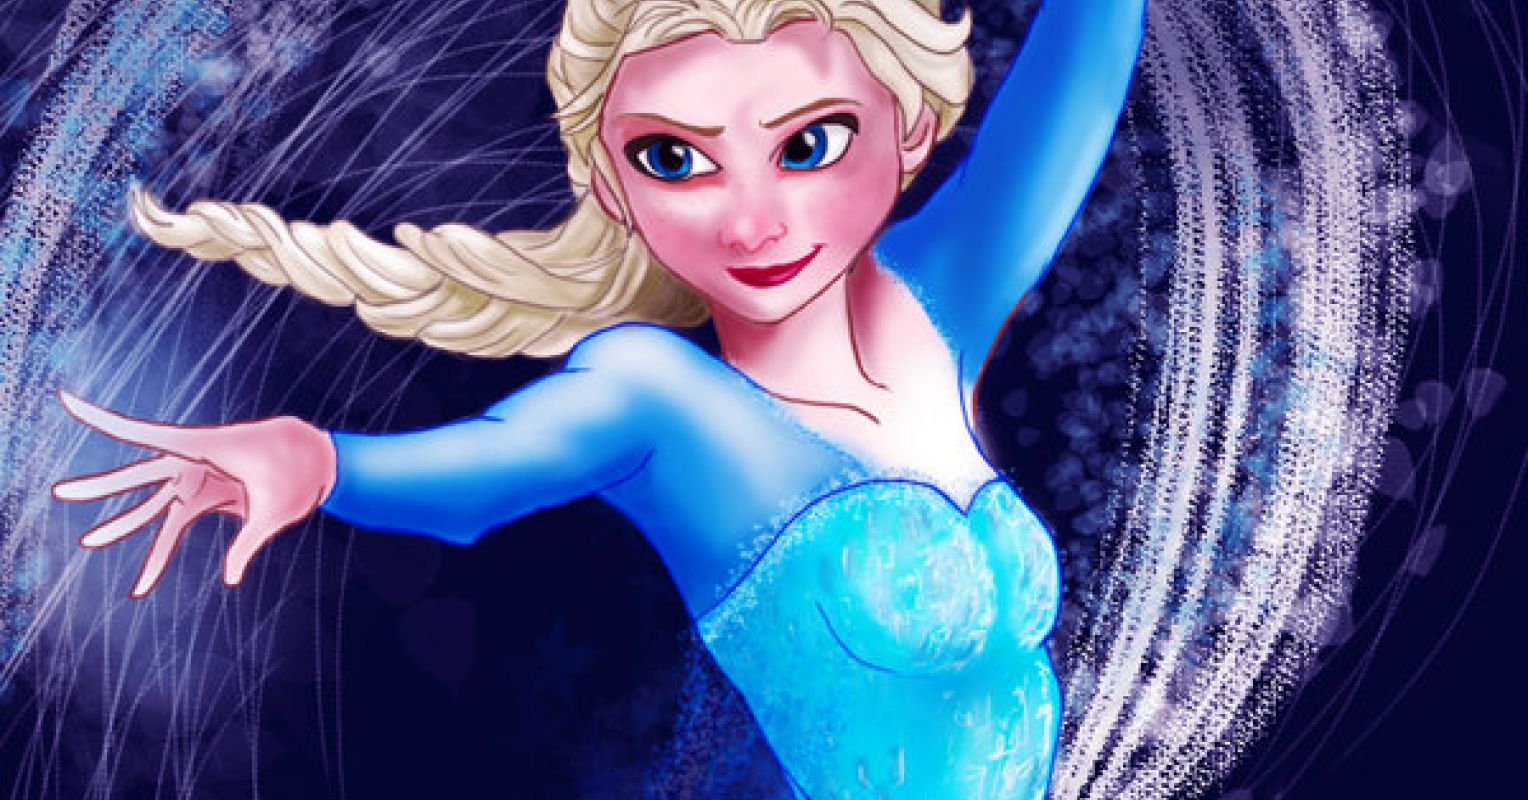 Disney Frozen Marshmallow Porn - 10 Ways Frozen Is The Story Of Loneliness | Psychology Today